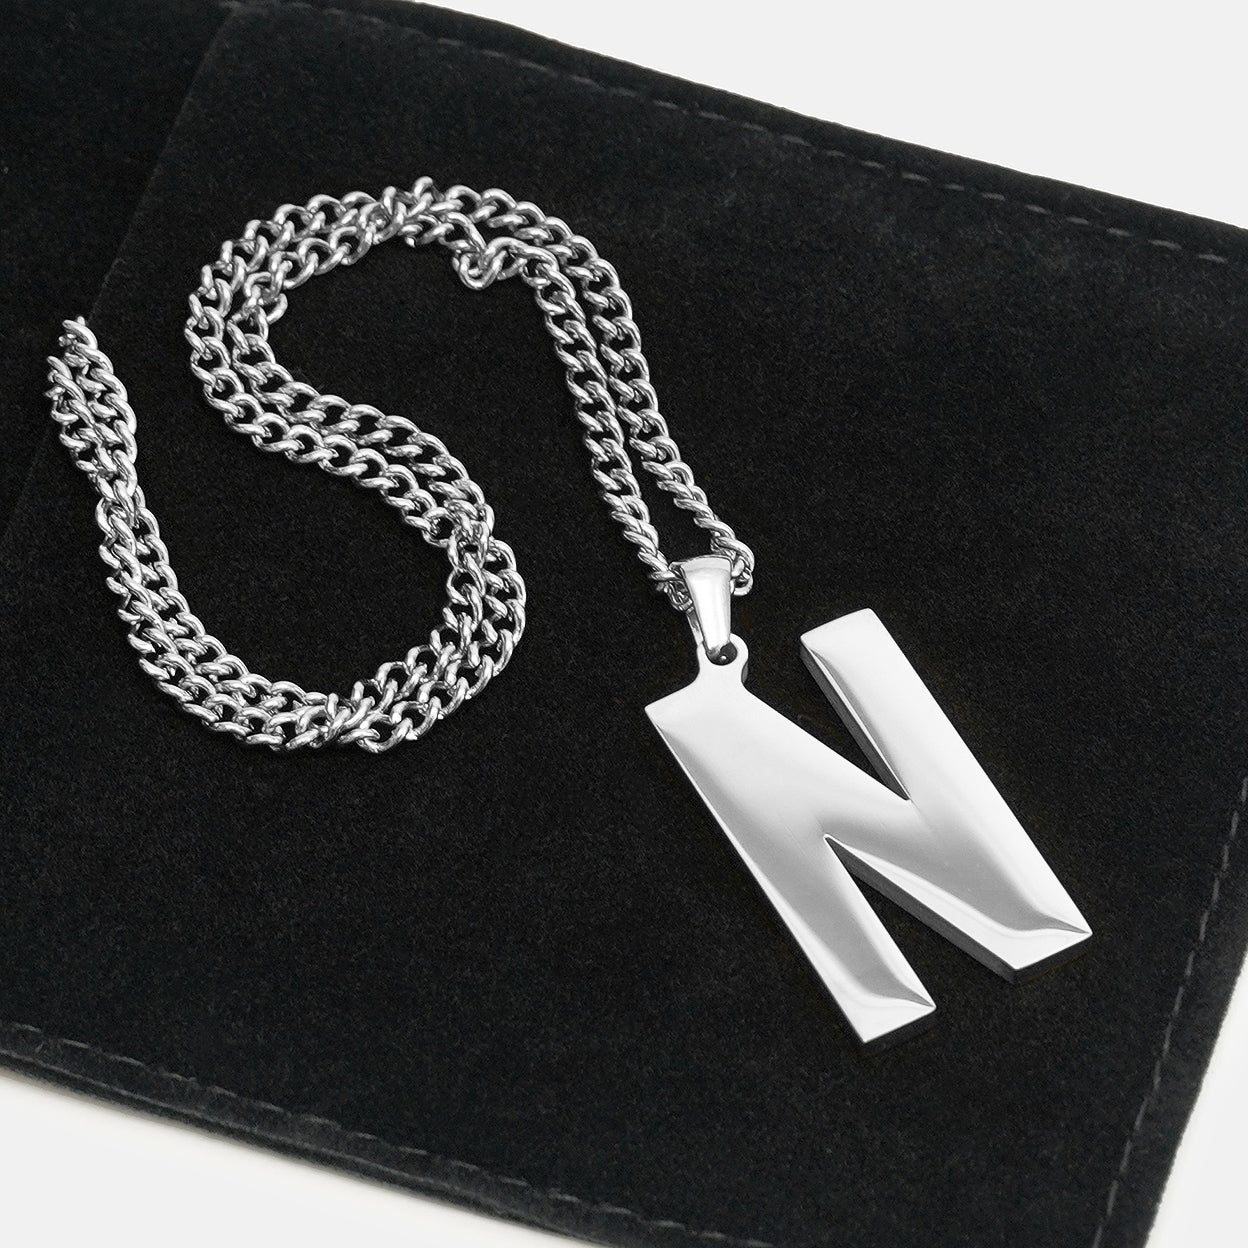 N Letter Pendant with Chain Necklace - Stainless Steel